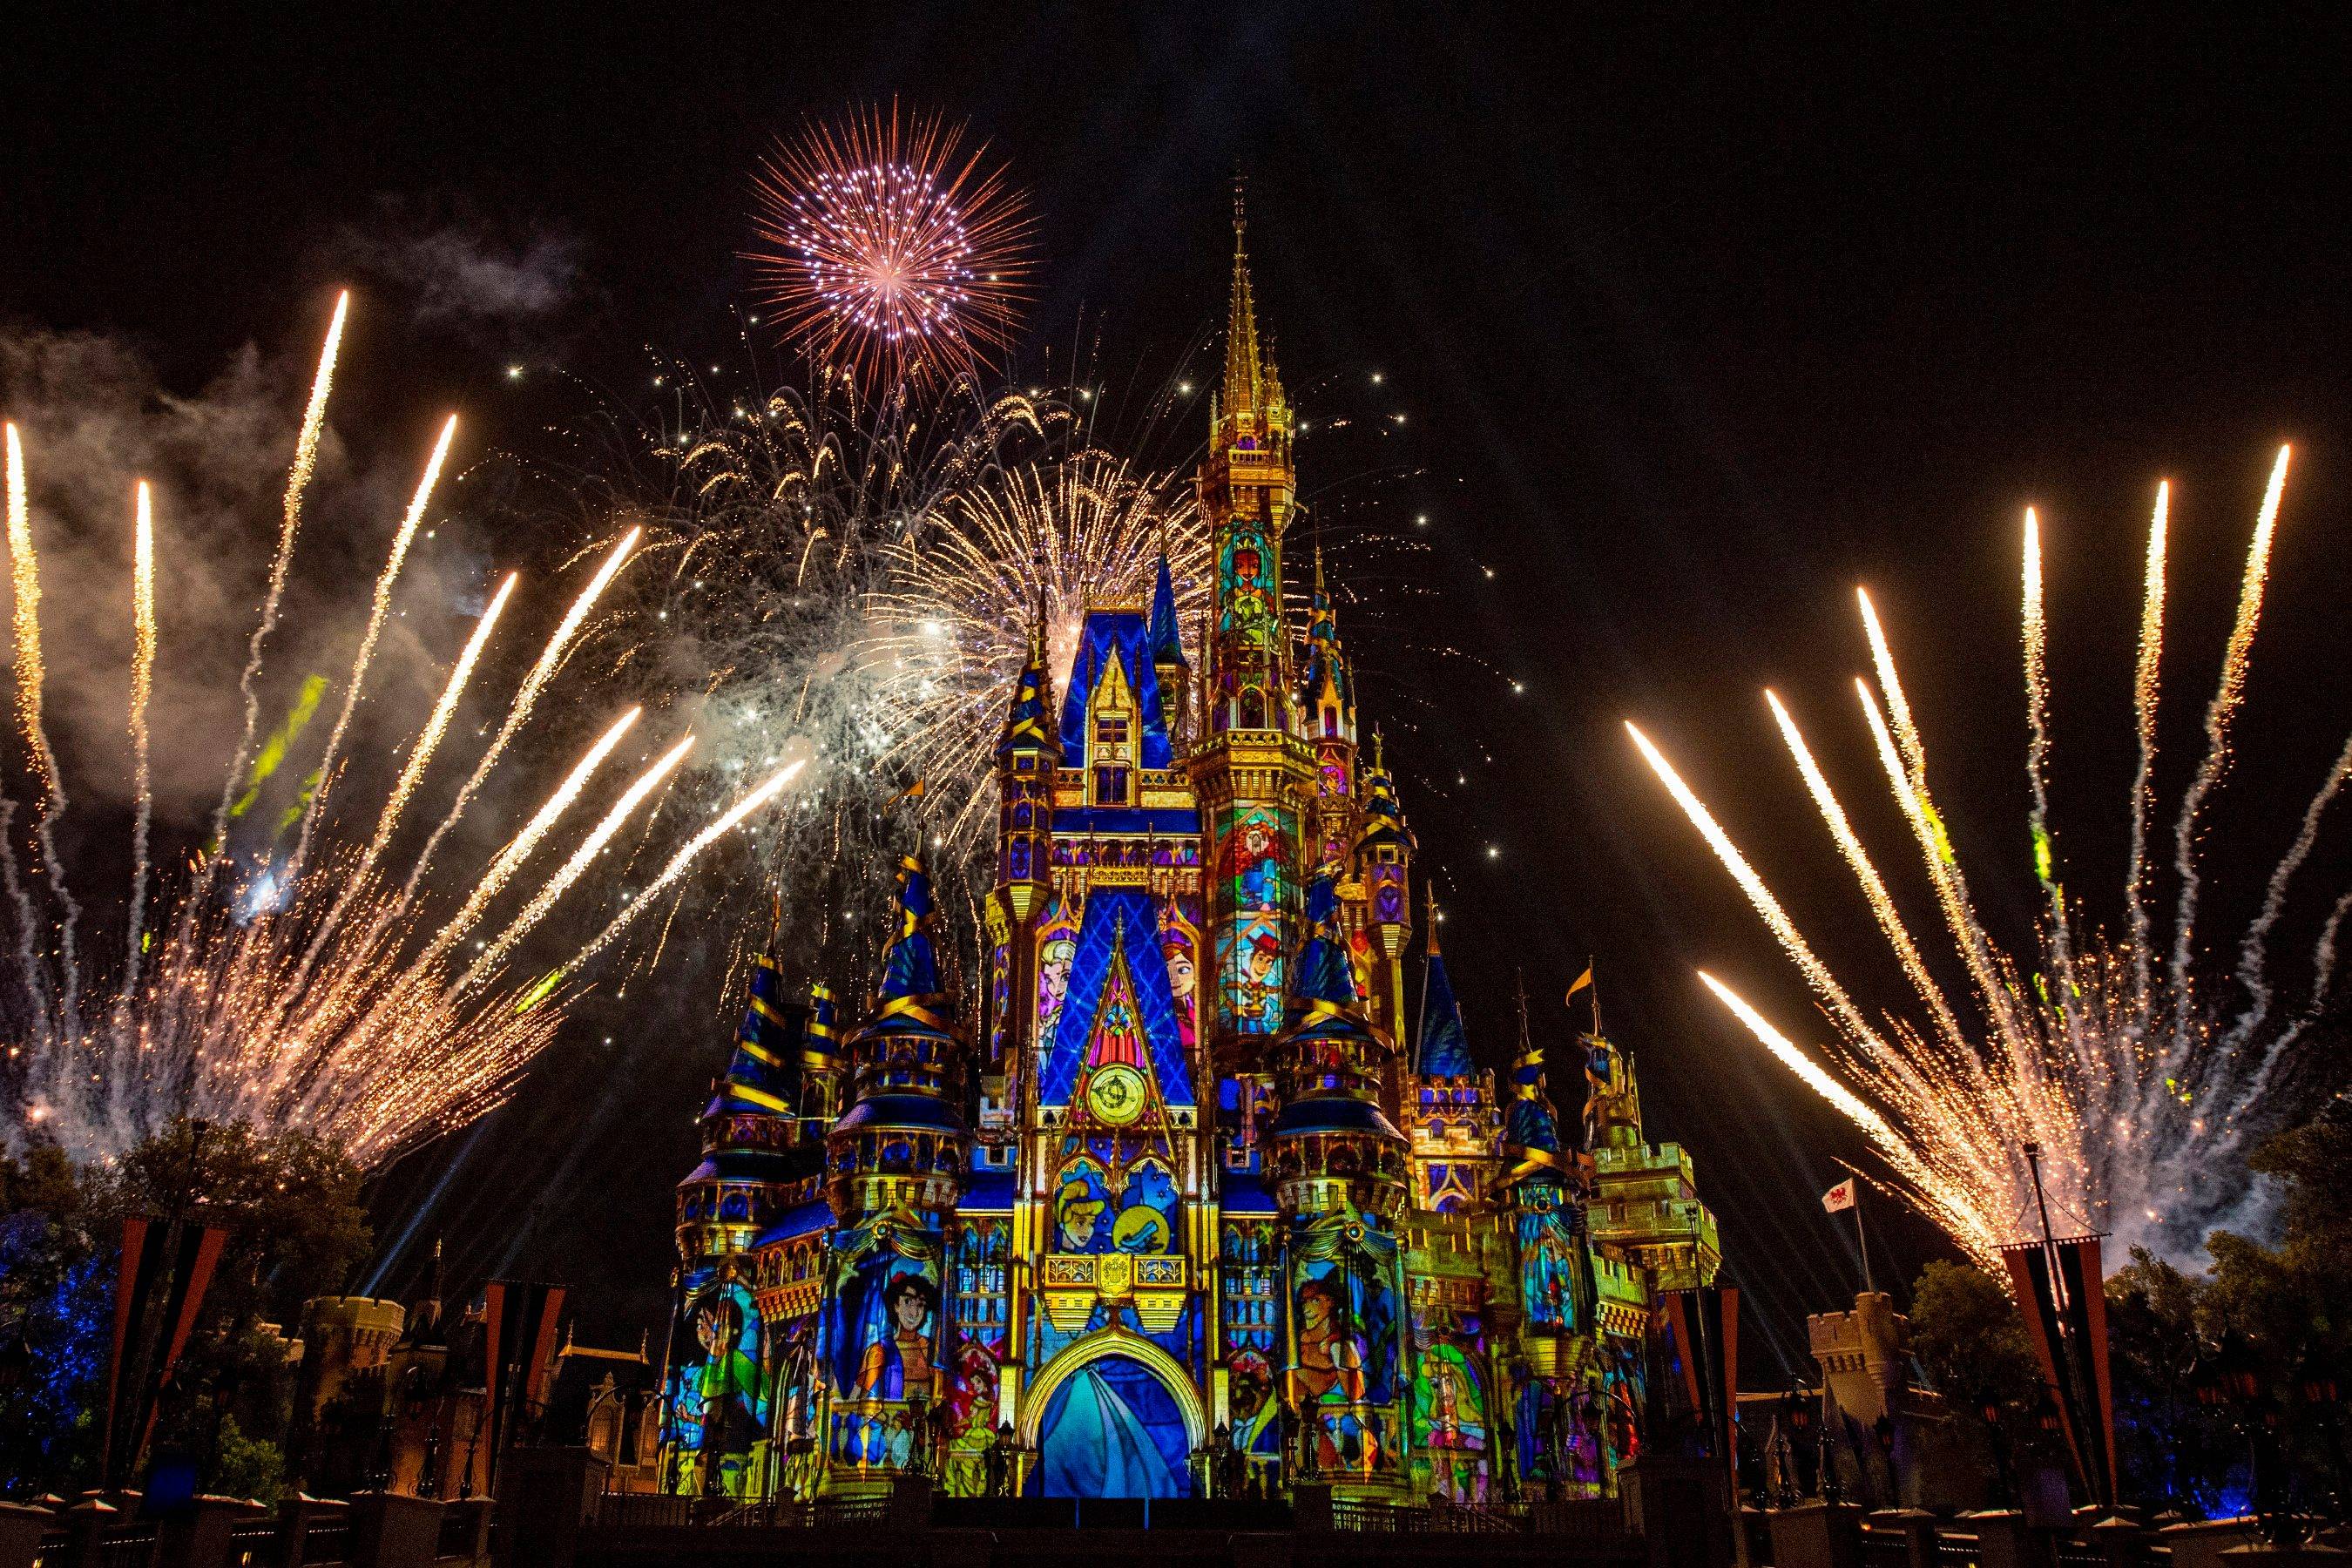 Nightly 'Happily Ever After' shows on pause at Magic Kingdom as hard-ticket event season begins